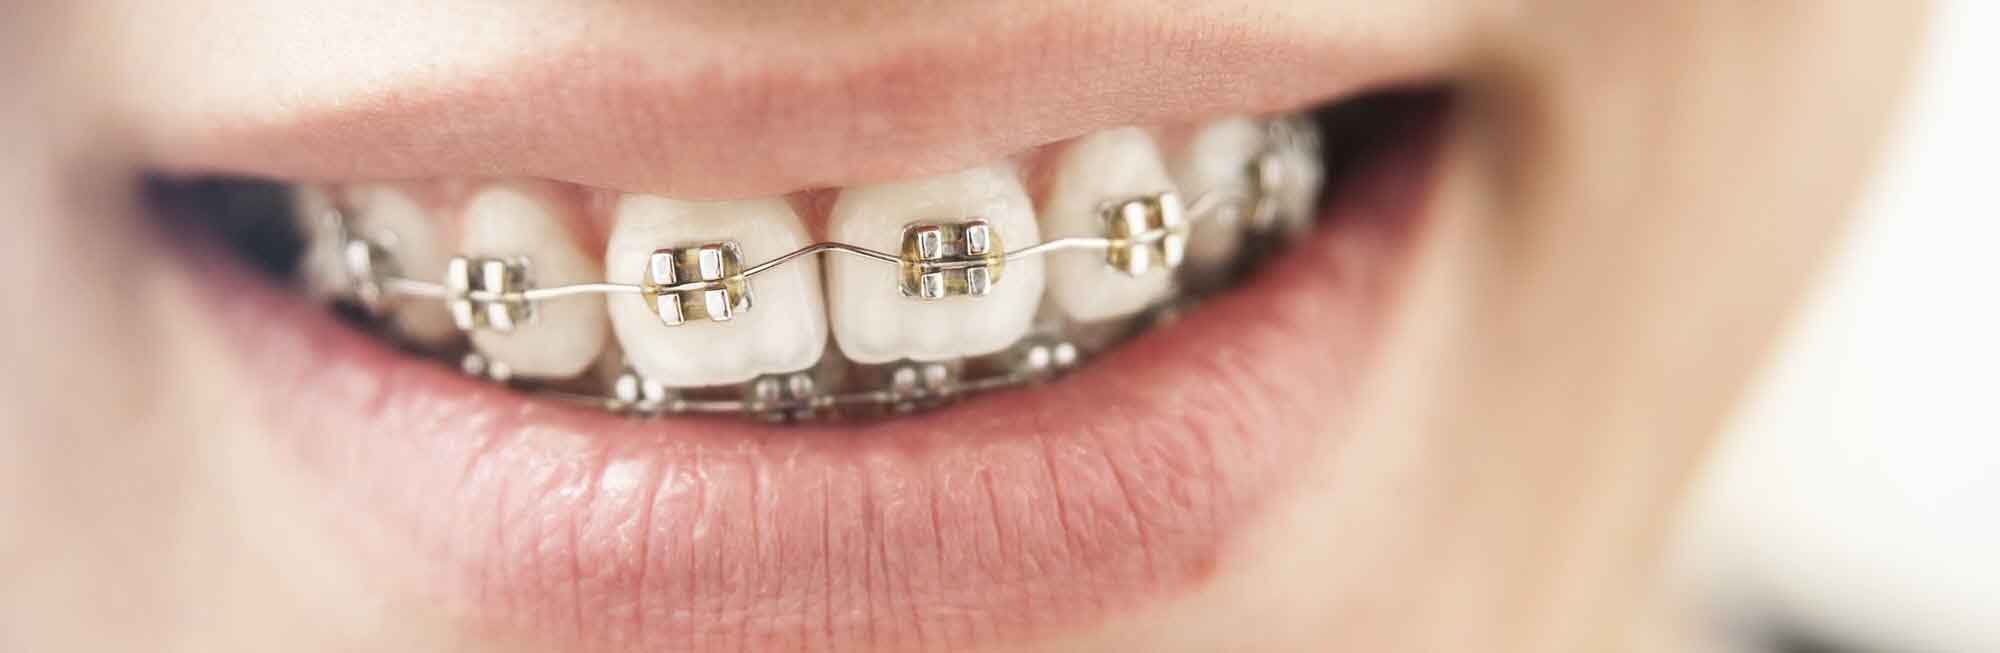 How Much Does Insurance Pay For Braces